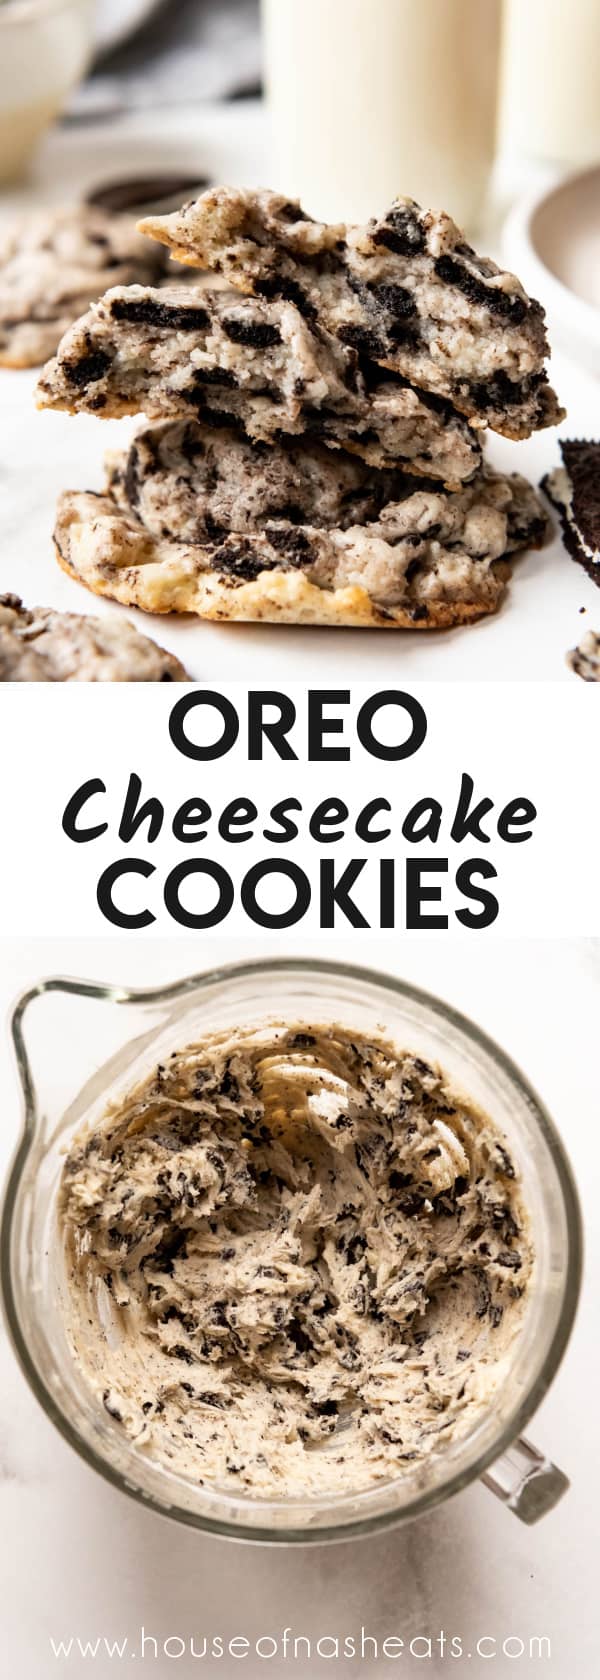 A collage of images of Oreo cheesecake cookies and cookie dough with text overlay.